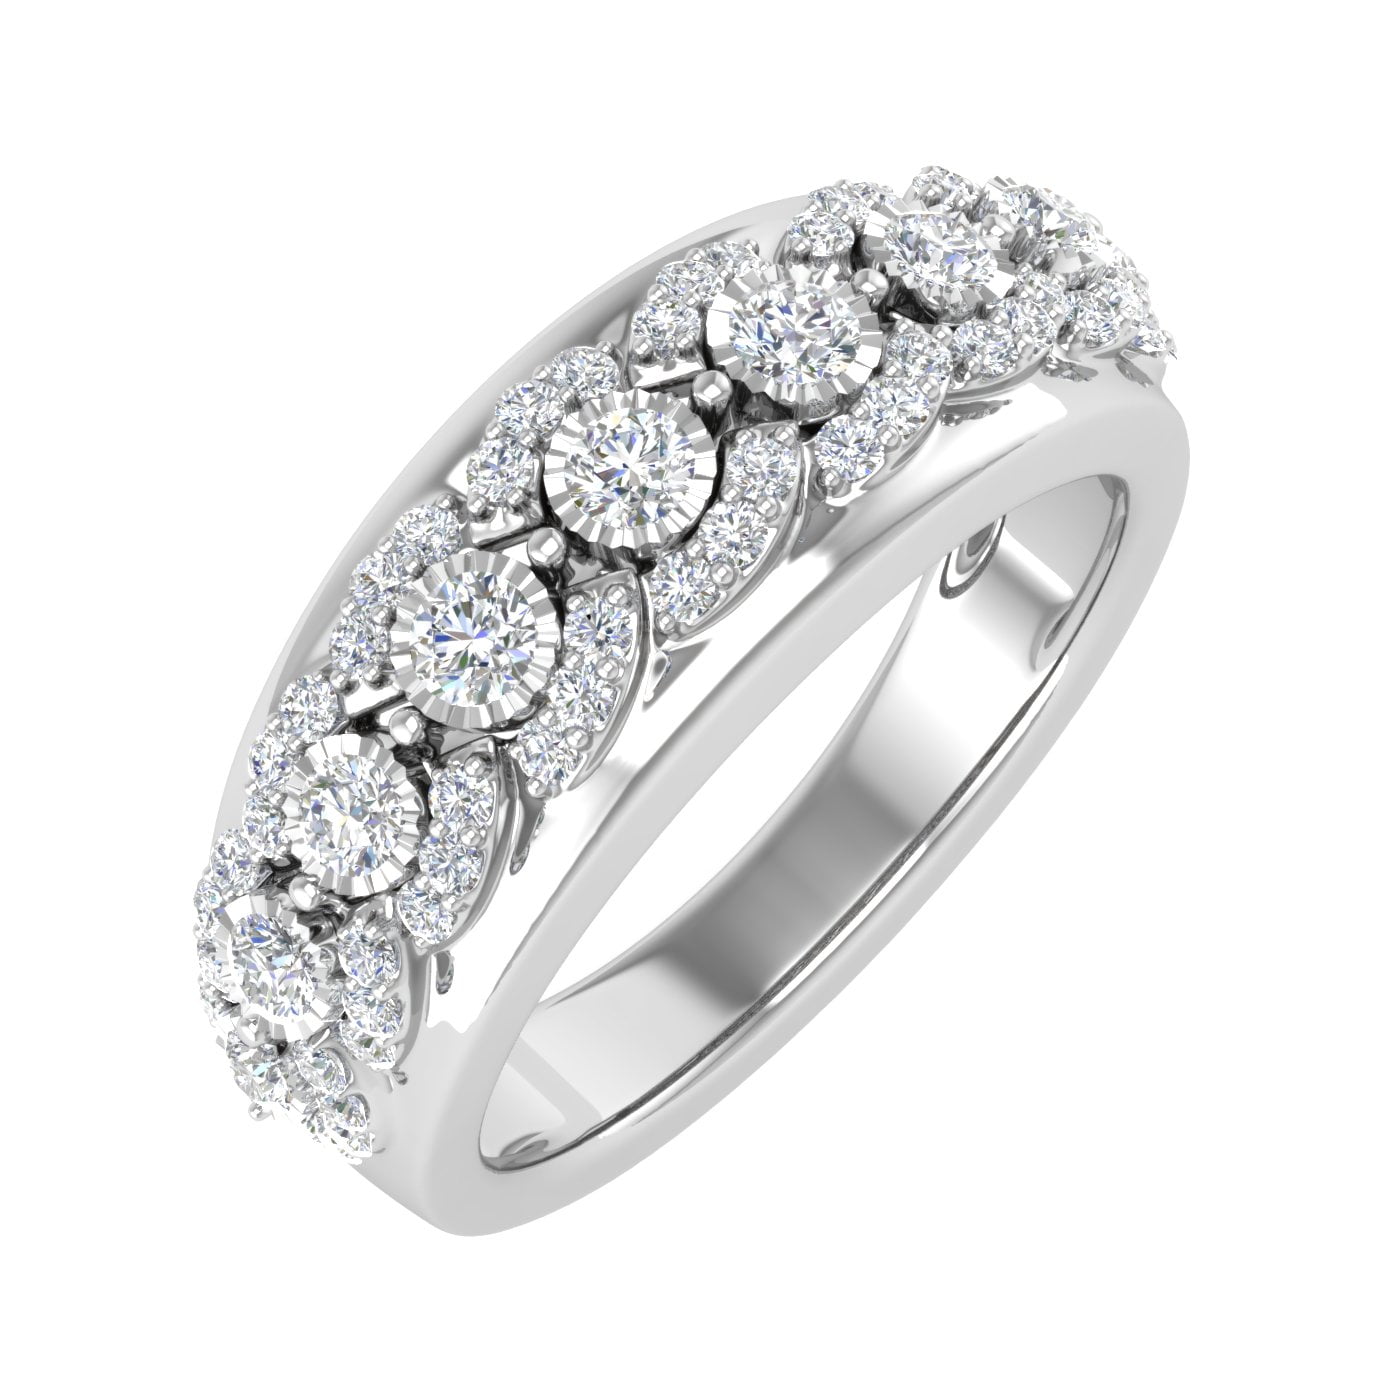 1/2 Carat Diamond Wedding Band Ring in 925 Sterling Silver 